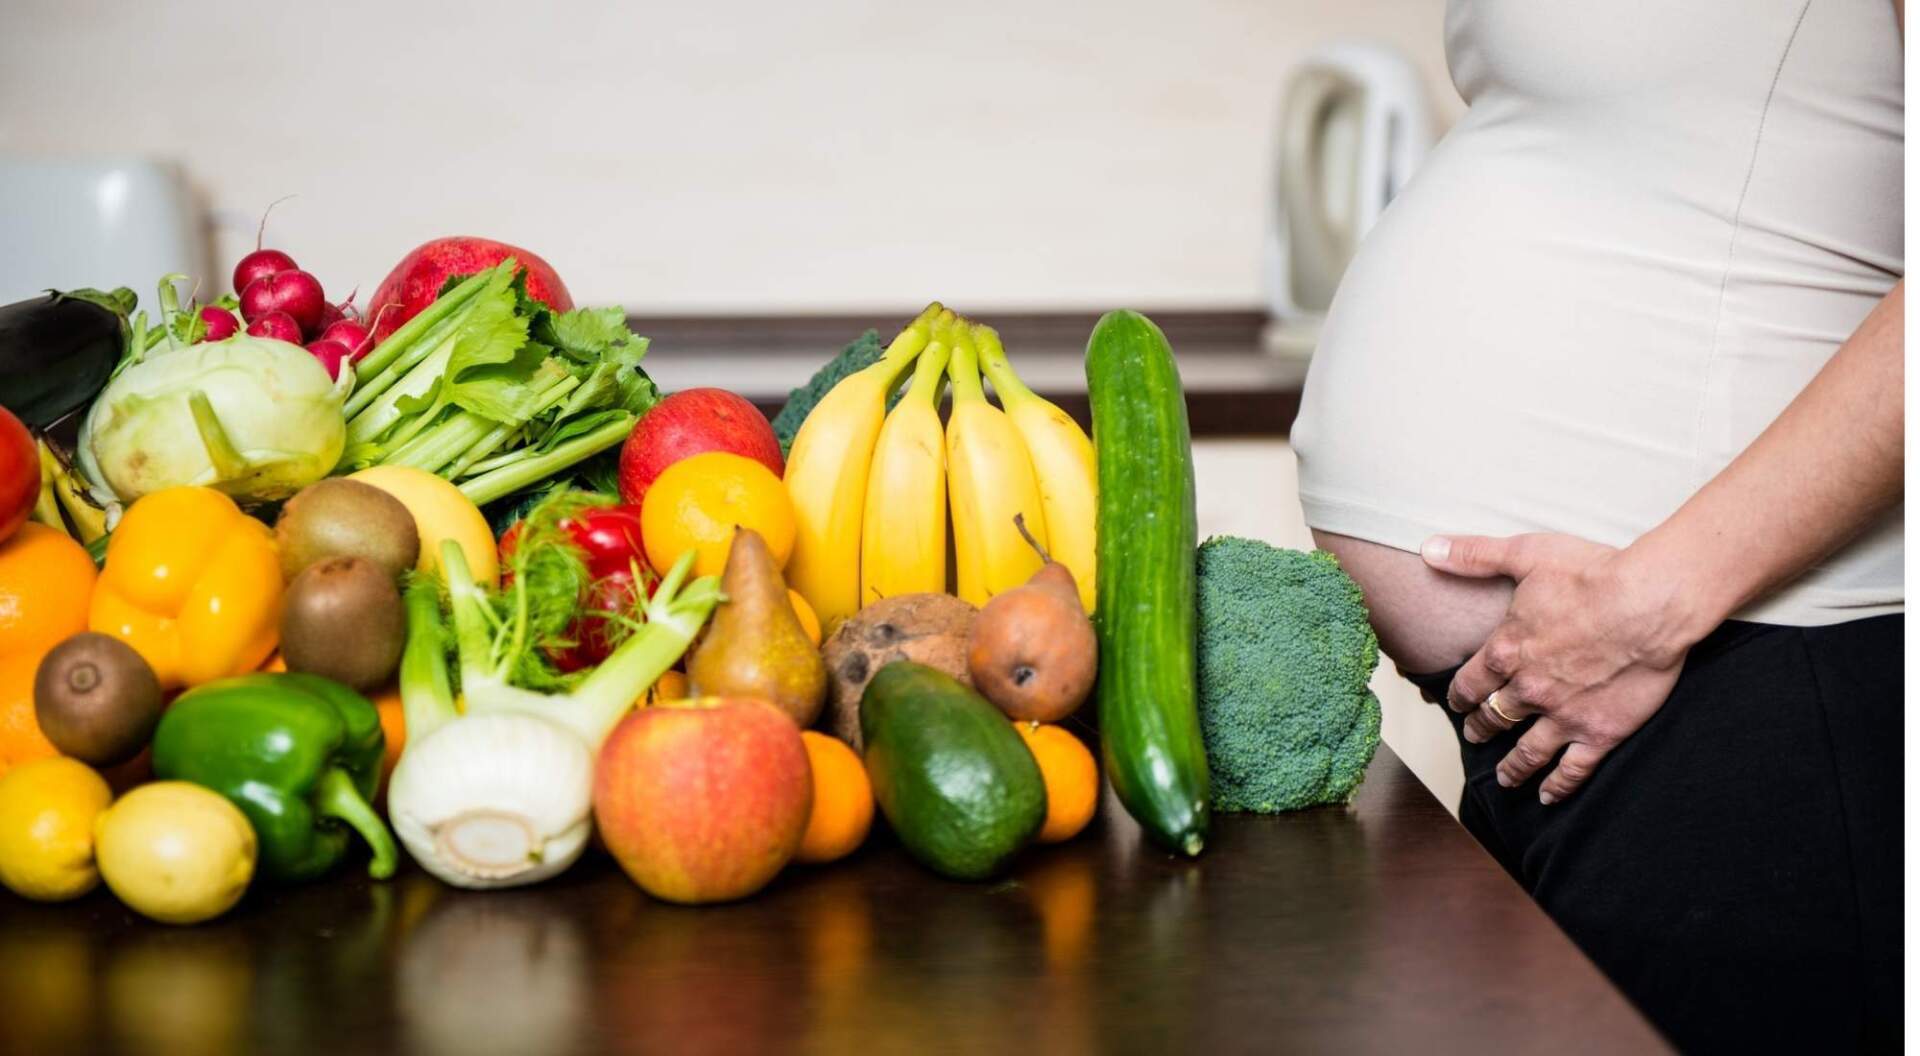 eating healthy while pregnant